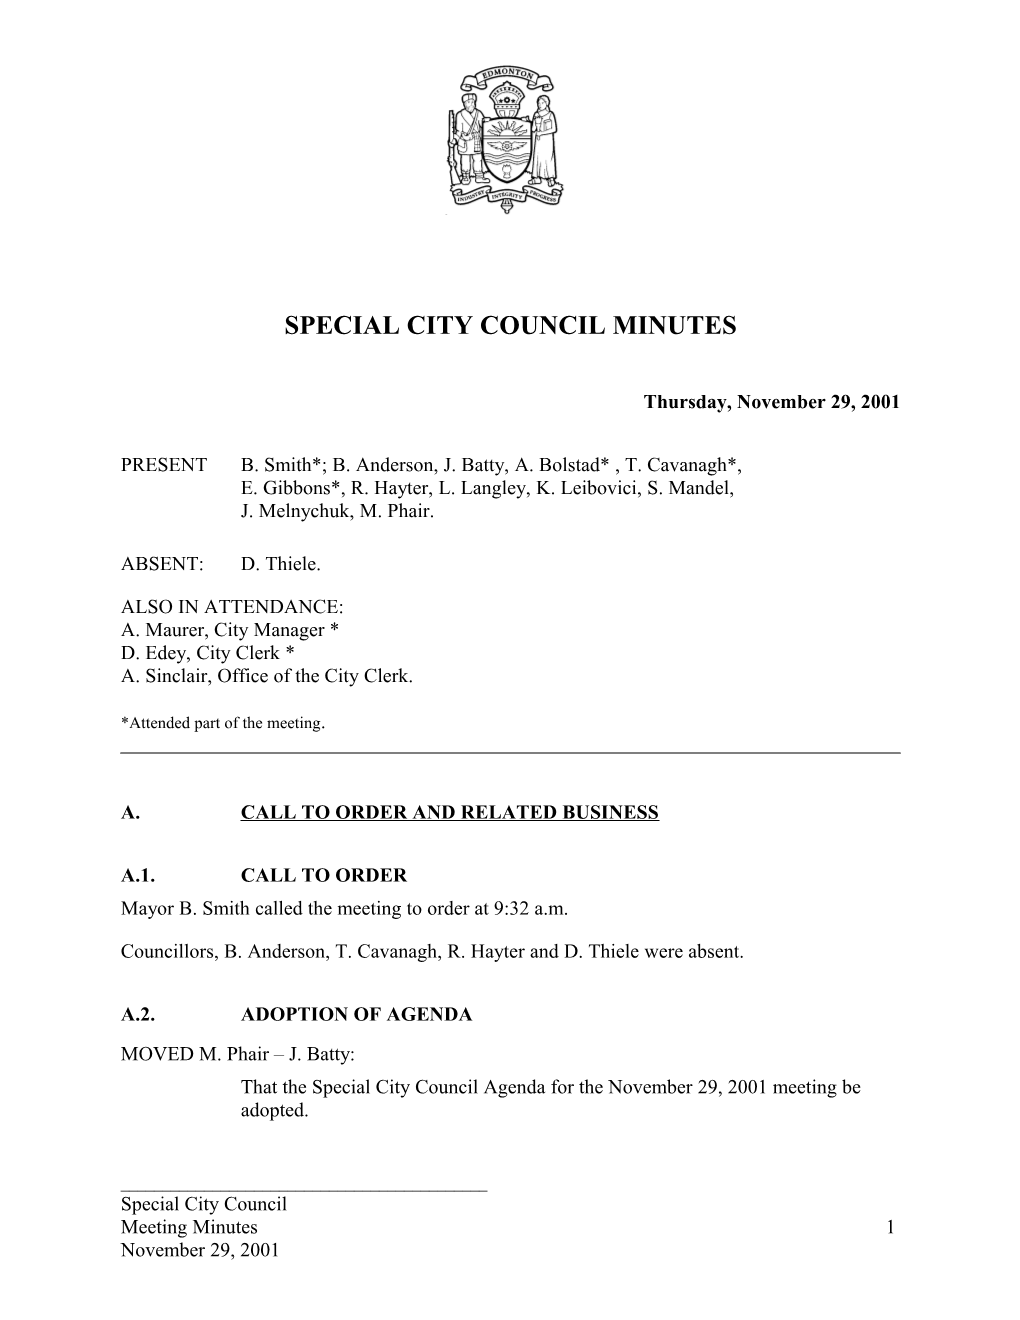 Minutes for City Council November 29, 2001 Meeting